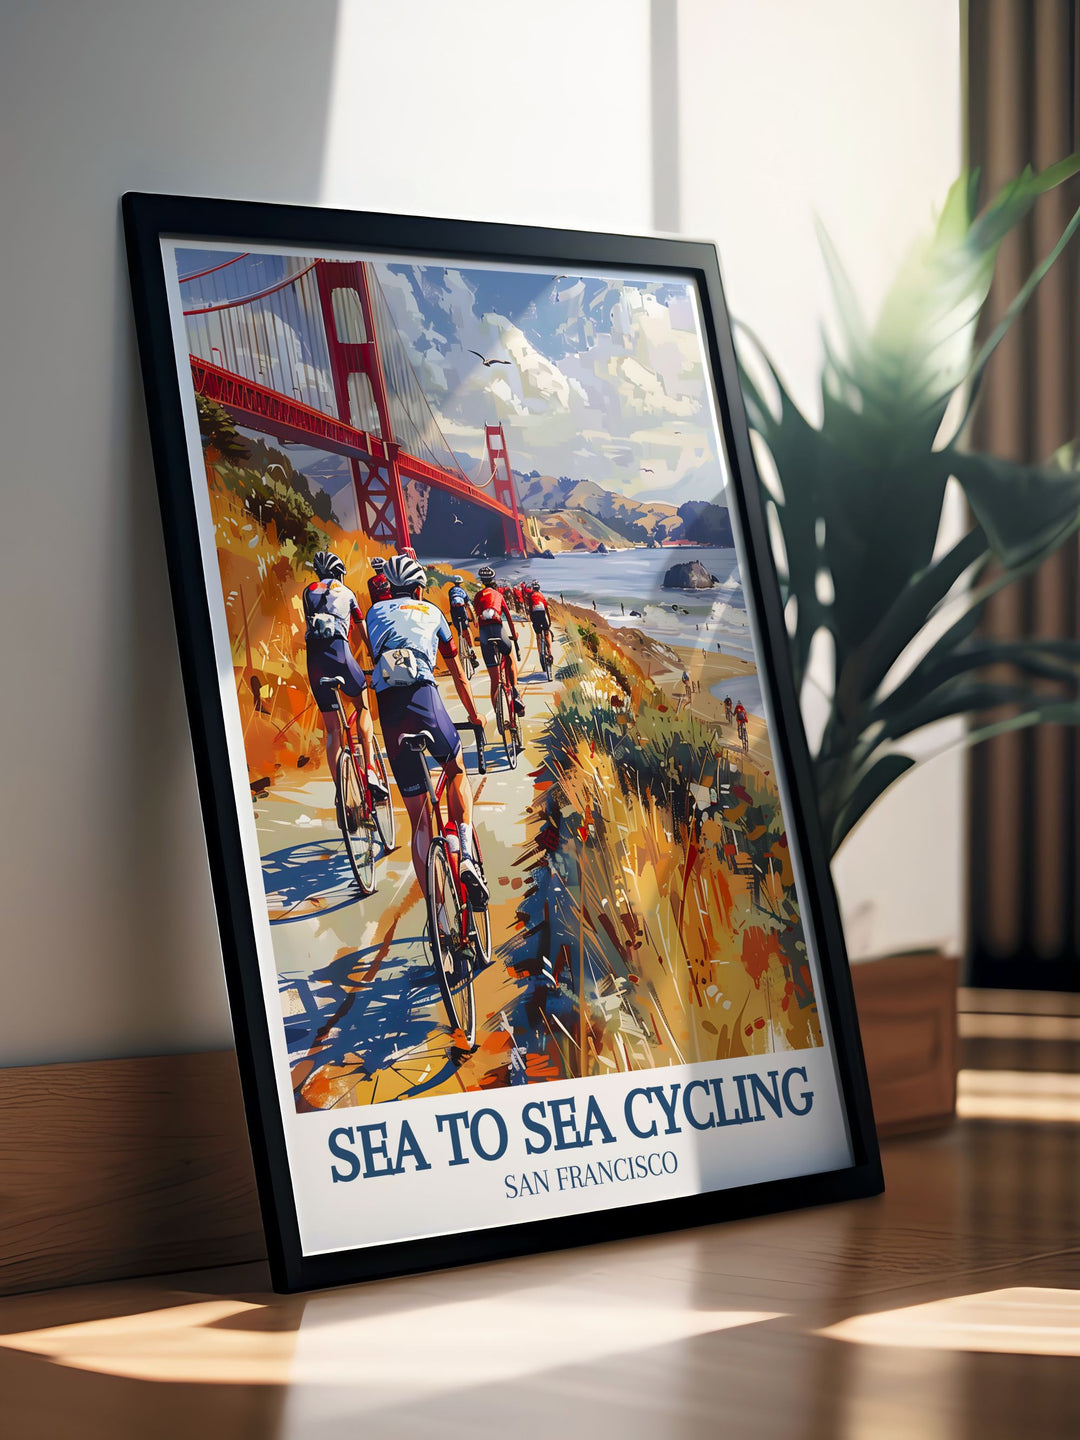 This travel poster features the Sea to Sea Cycling Route across England and the iconic Golden Gate Bridge in San Francisco, capturing the diverse landscapes and architectural beauty of these renowned landmarks, perfect for cycling enthusiasts and wall art decor lovers.